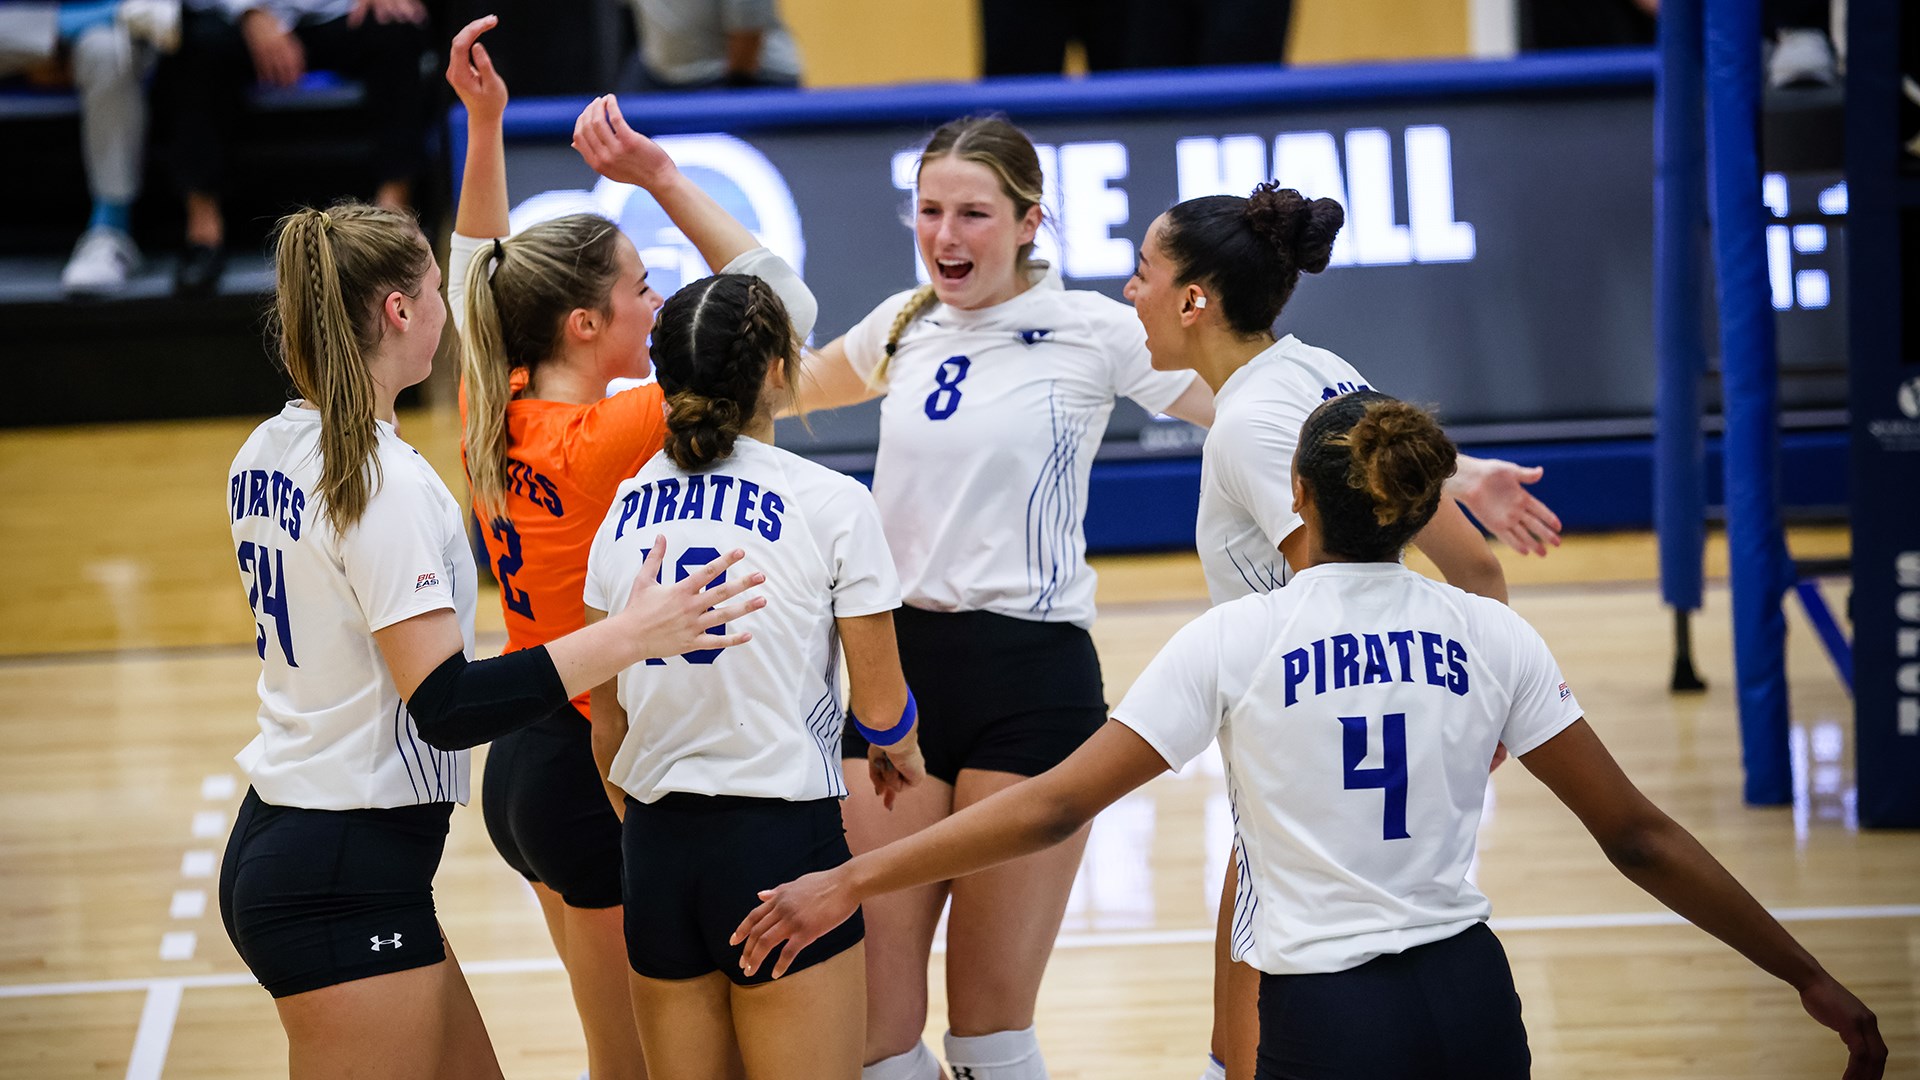 The Seton Hall women's volleyball team celebrates after winning a match during the 2021-22 season.